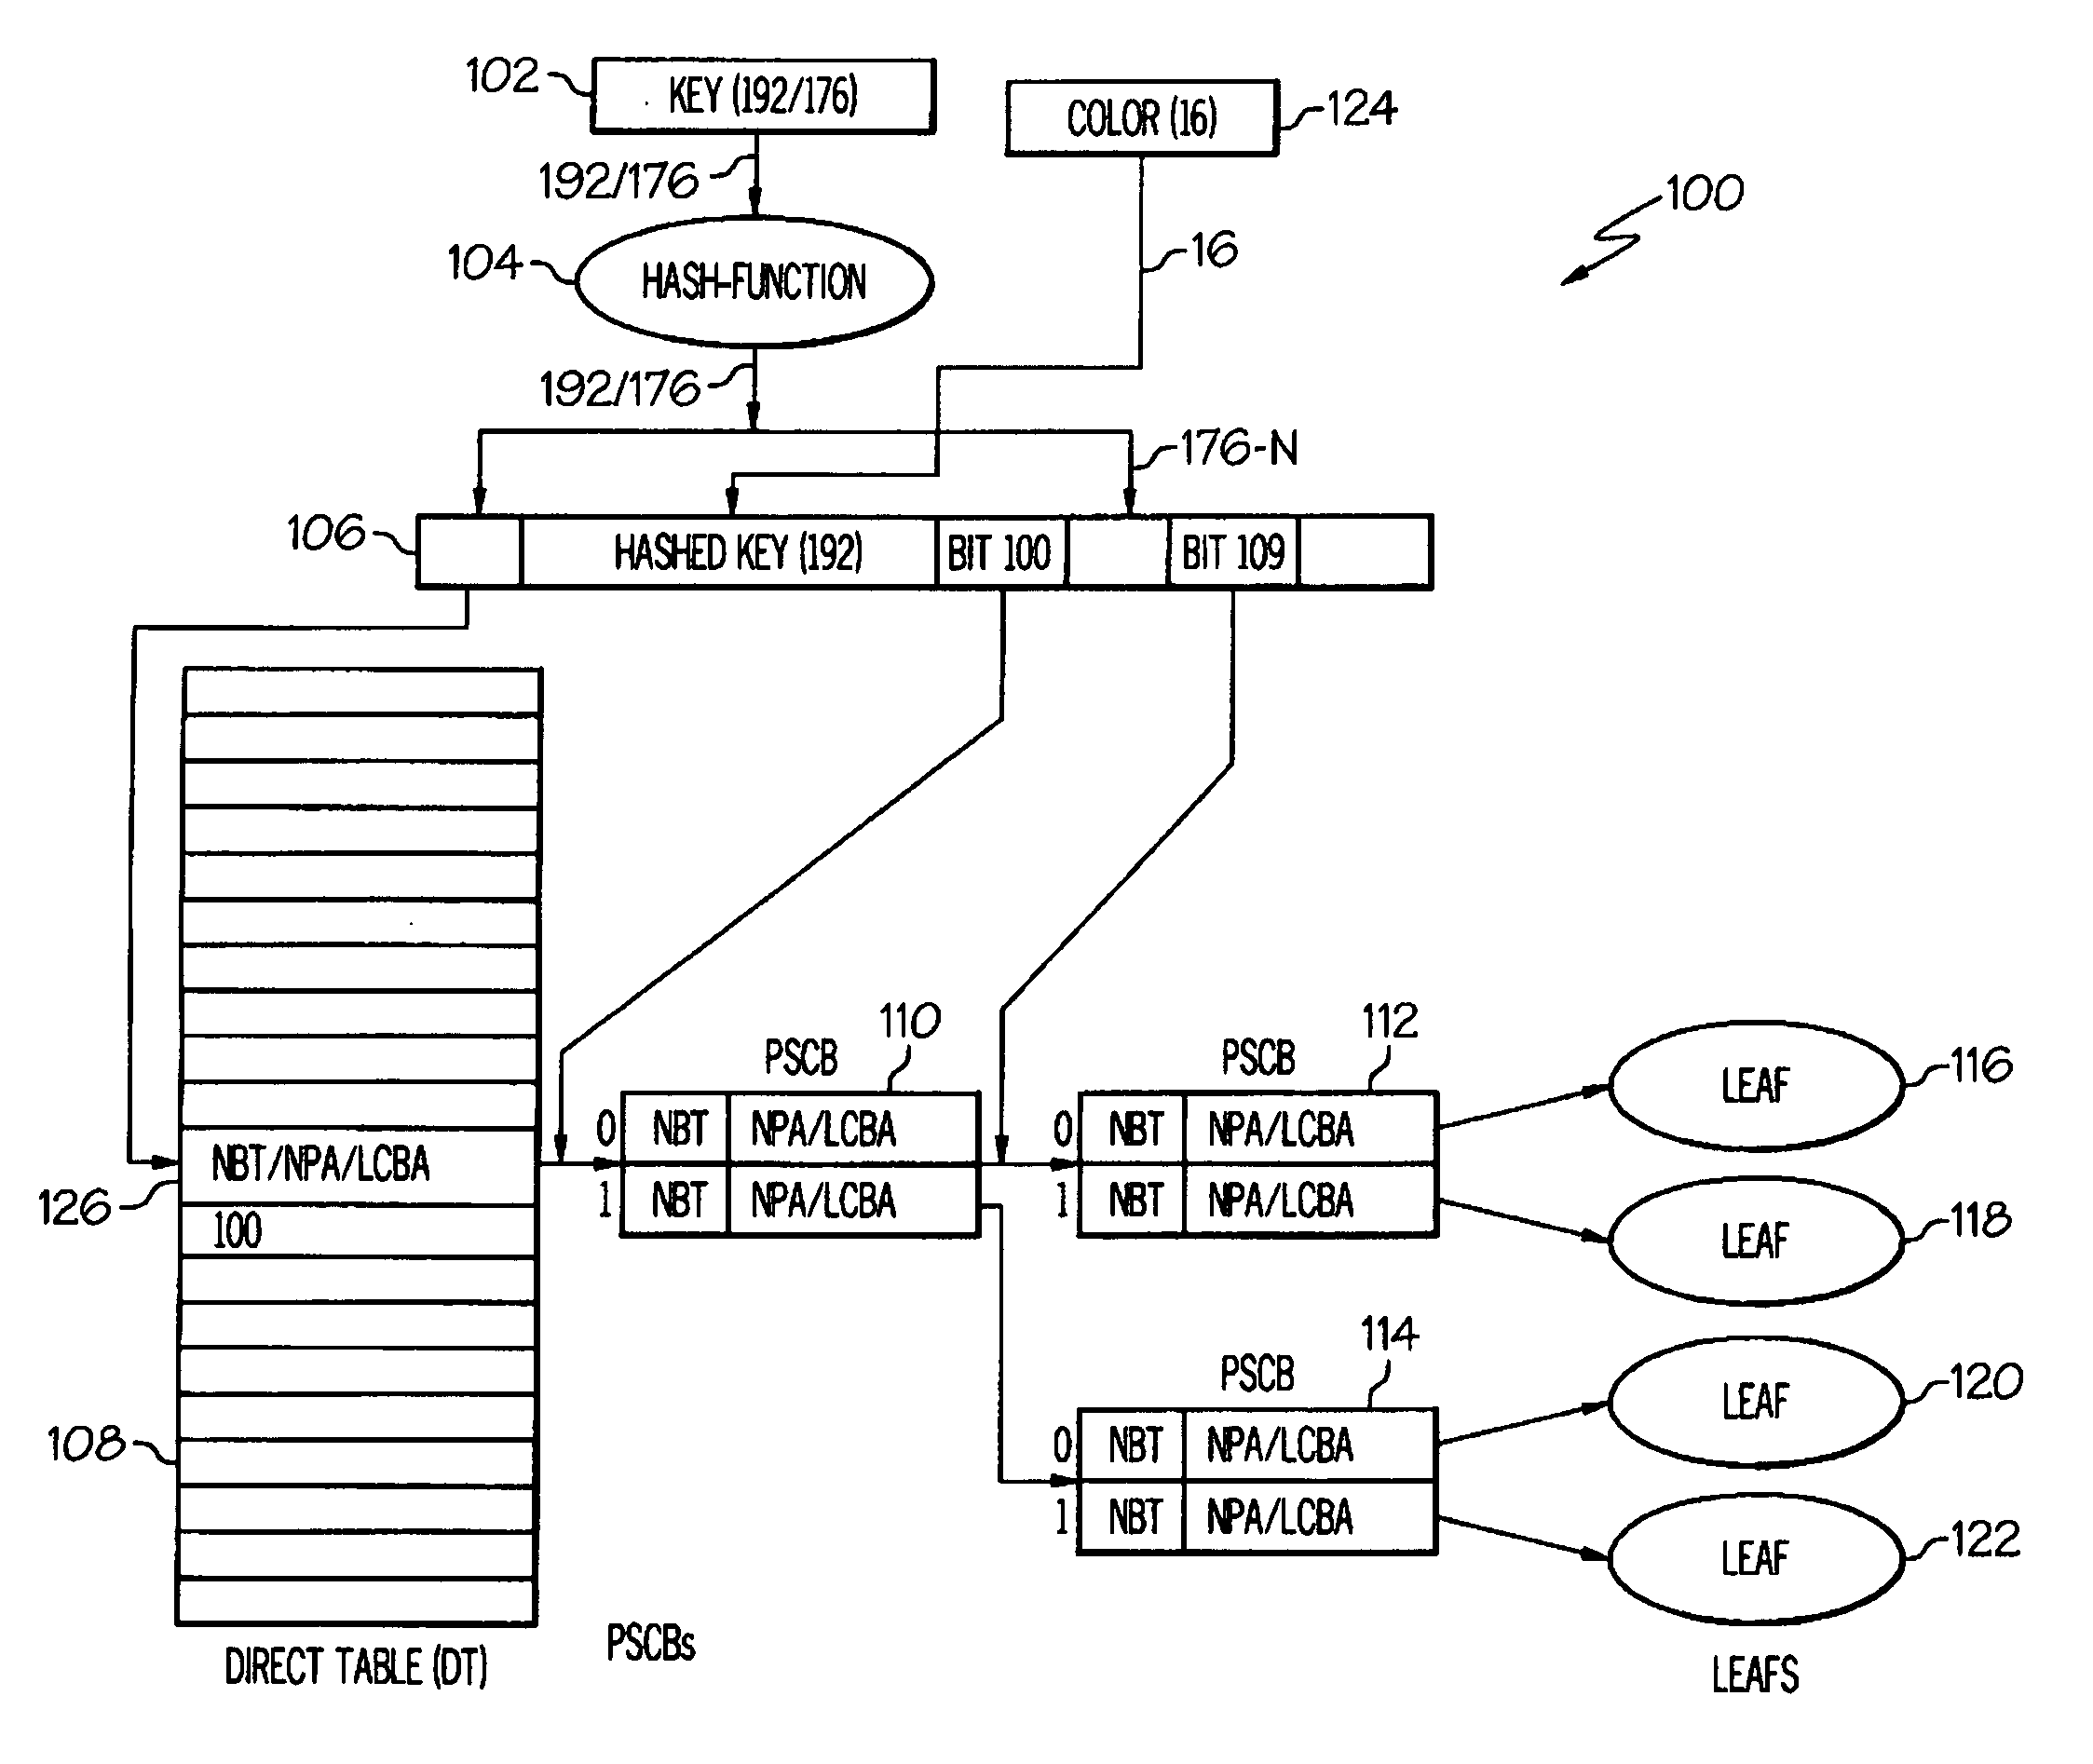 Software management tree implementation for a network processor